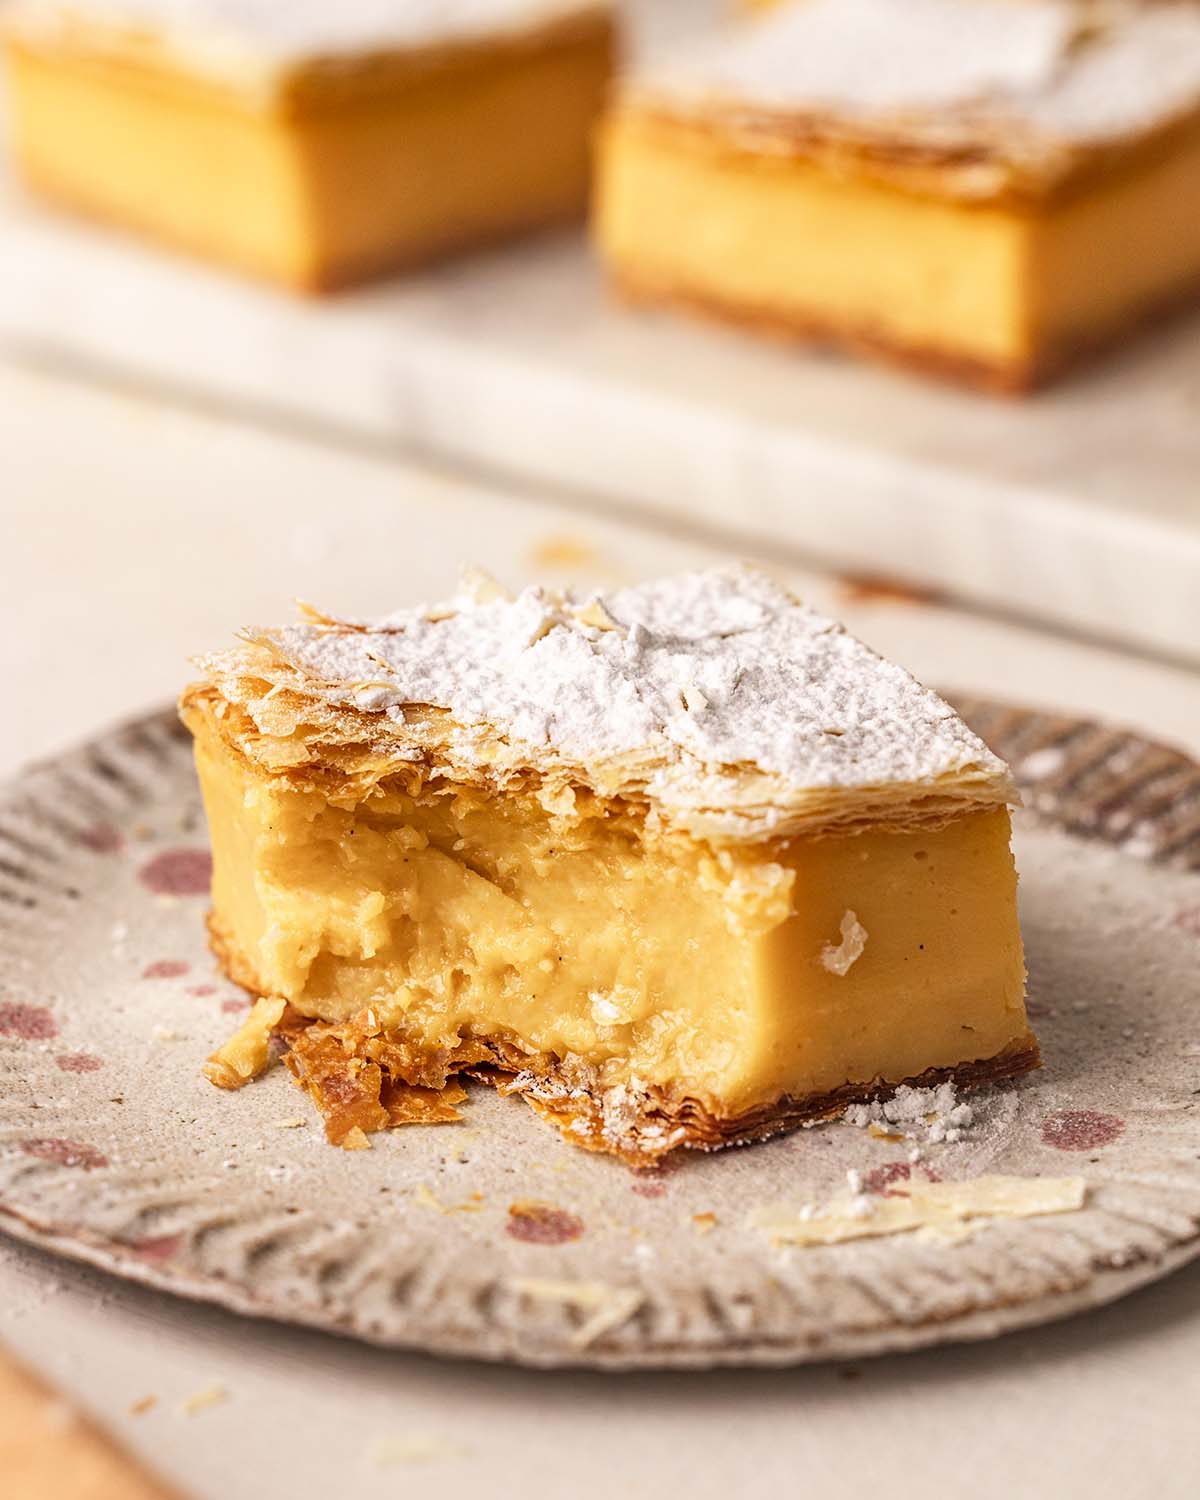 Close up of vanilla slice on plate with bite taken out showing creamy custard and layers of flaky pastry.